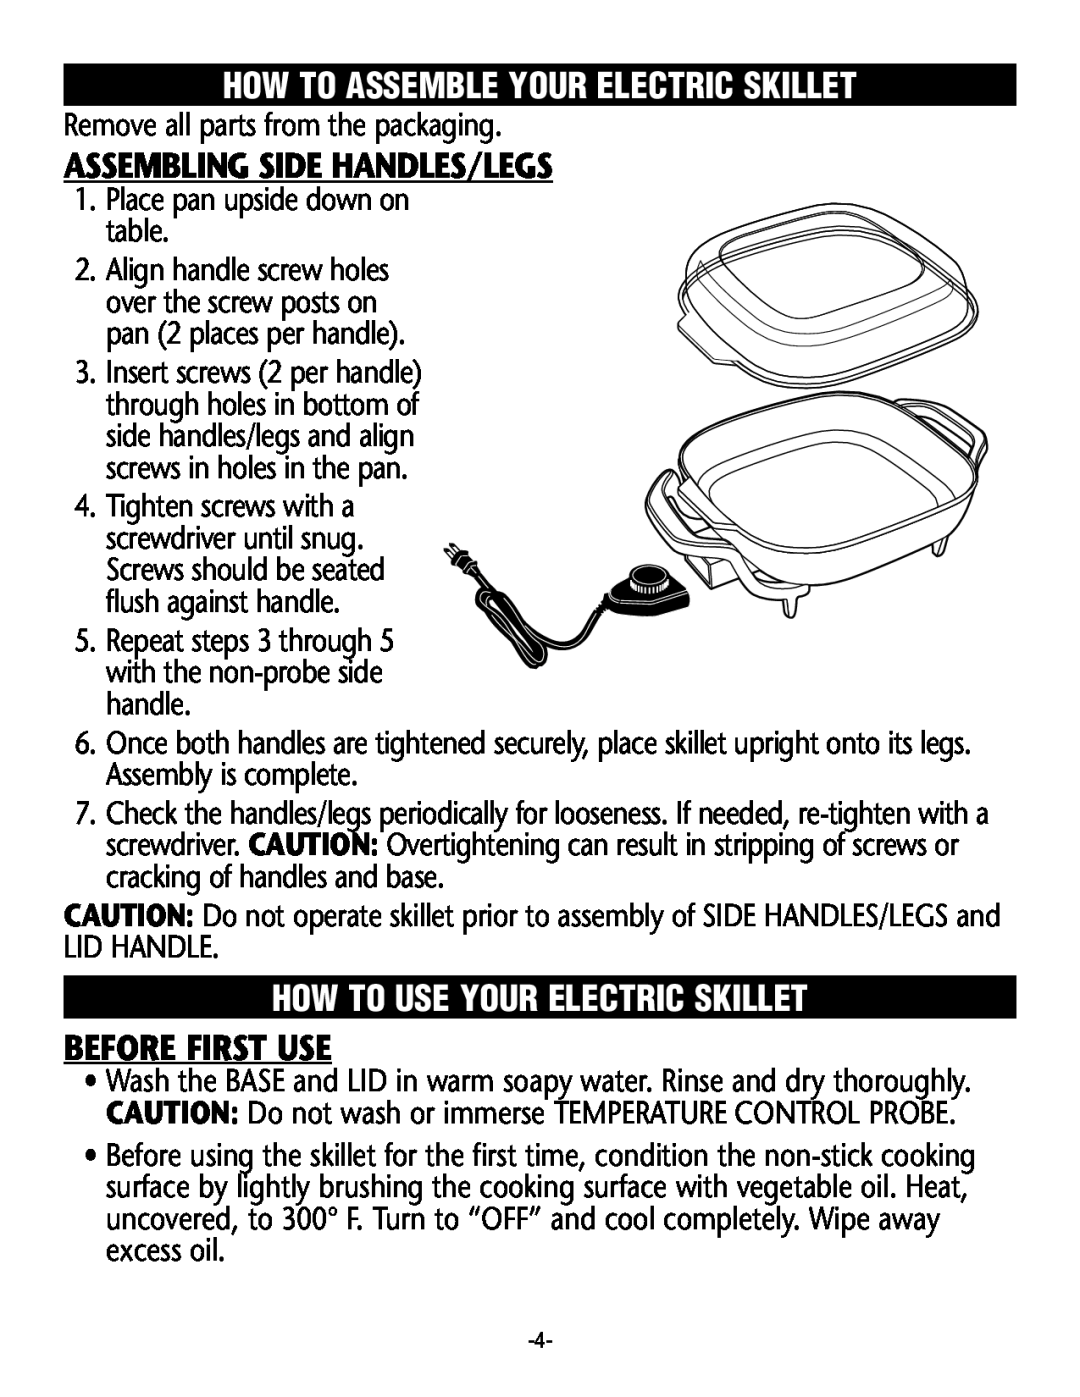 Rival S12 G manual How To Assemble Your Electric Skillet, Assembling Side Handles/Legs, How To Use Your Electric Skillet 